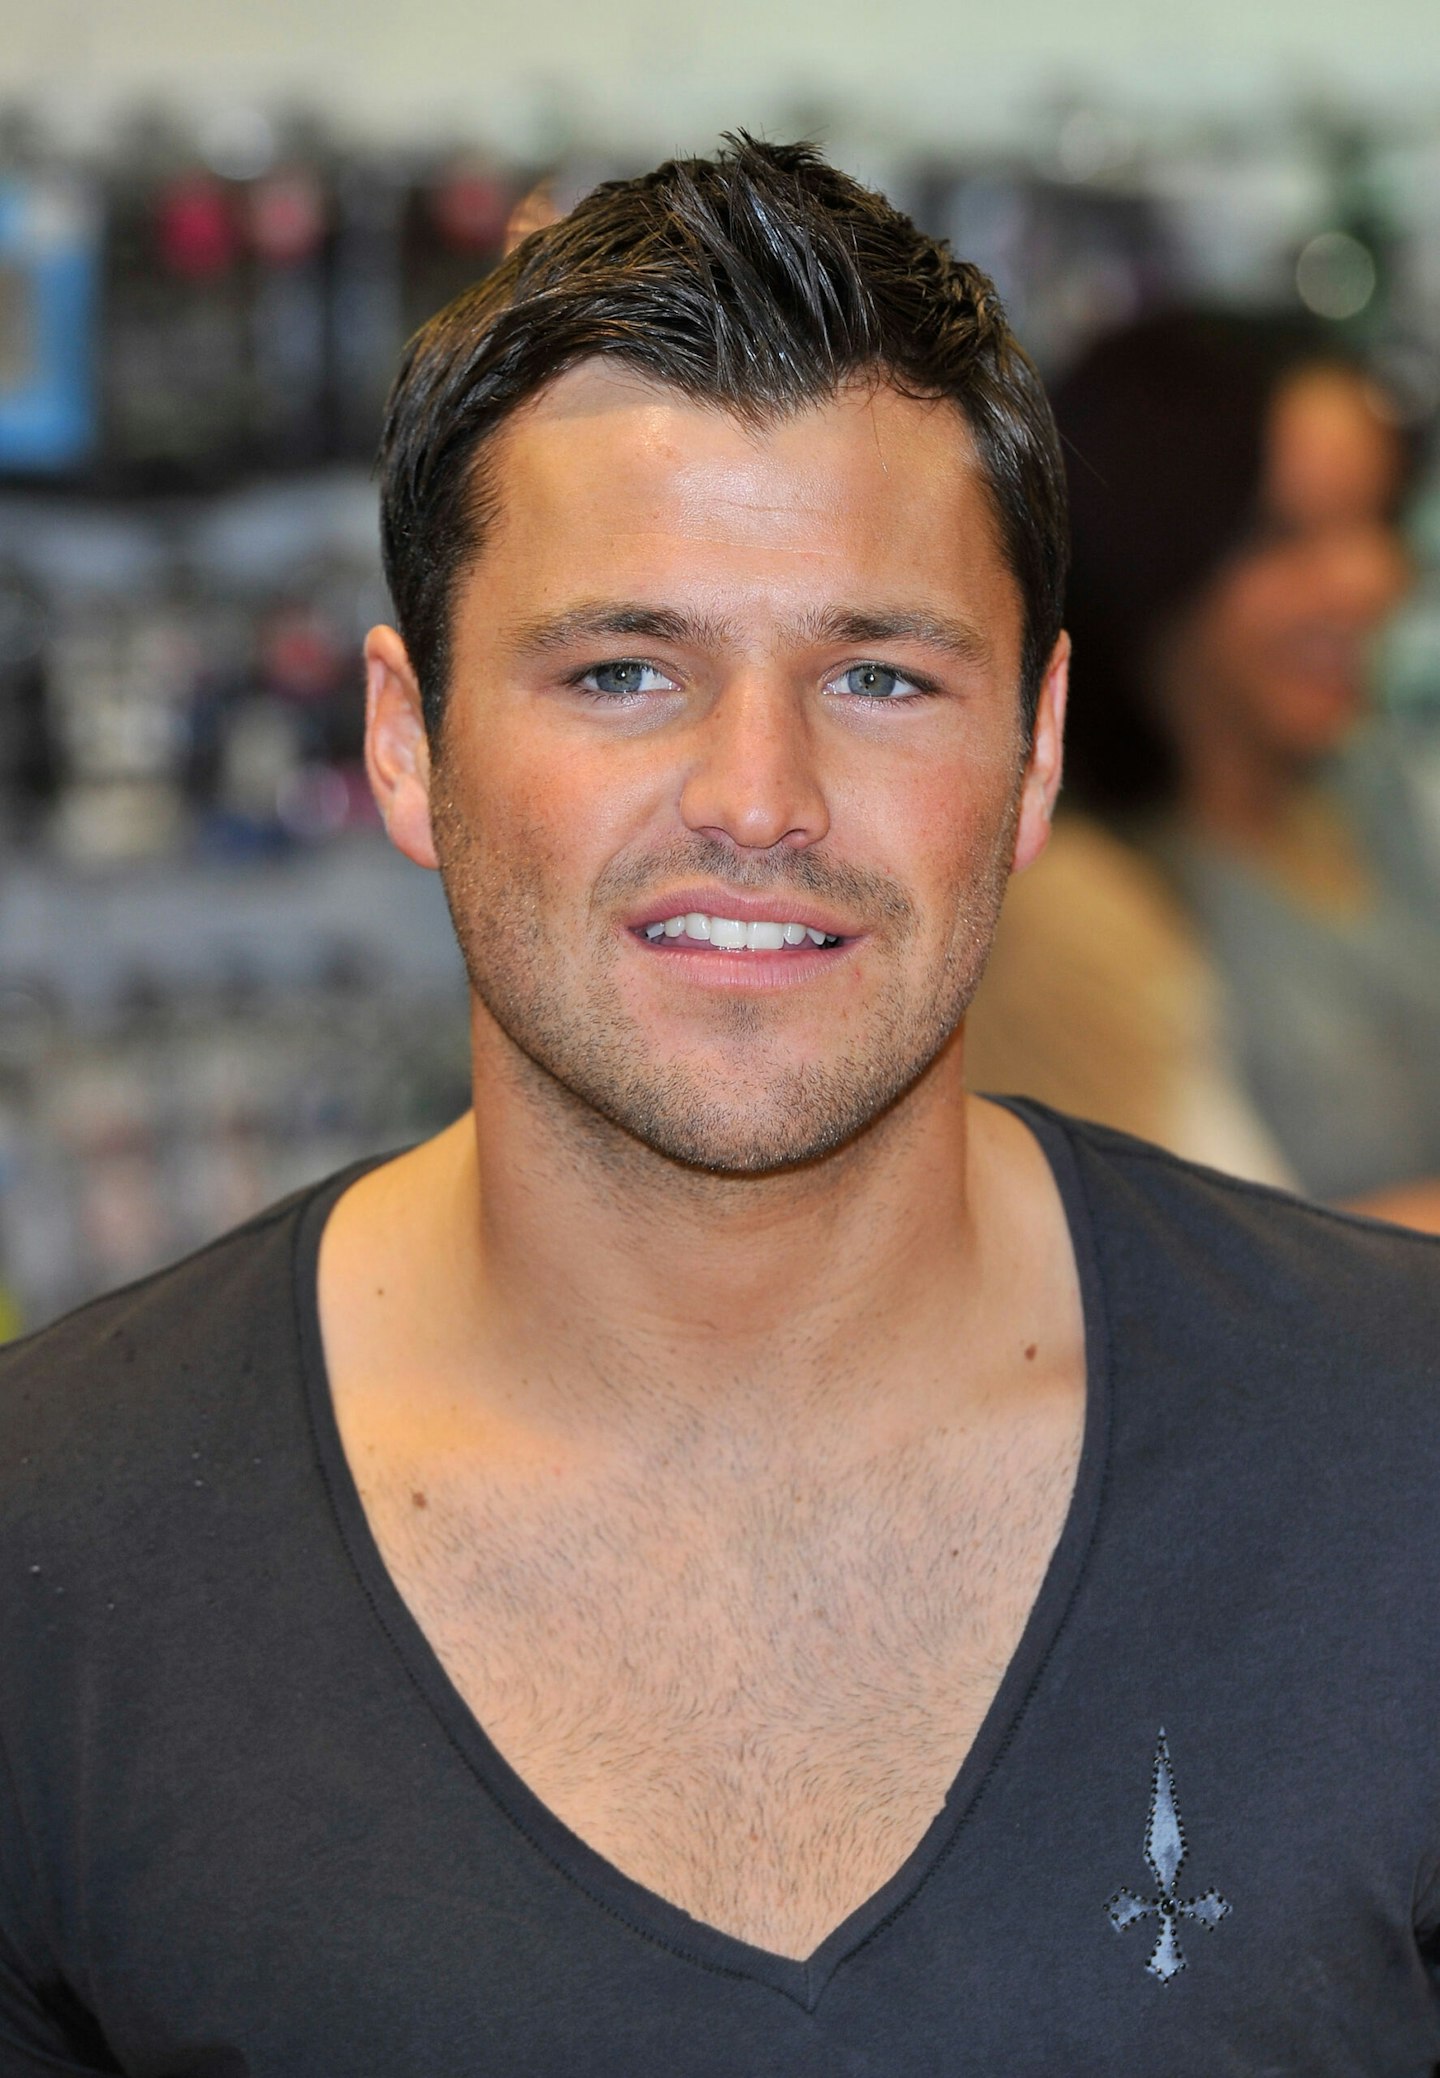 Mark Wright in his TOWIE years